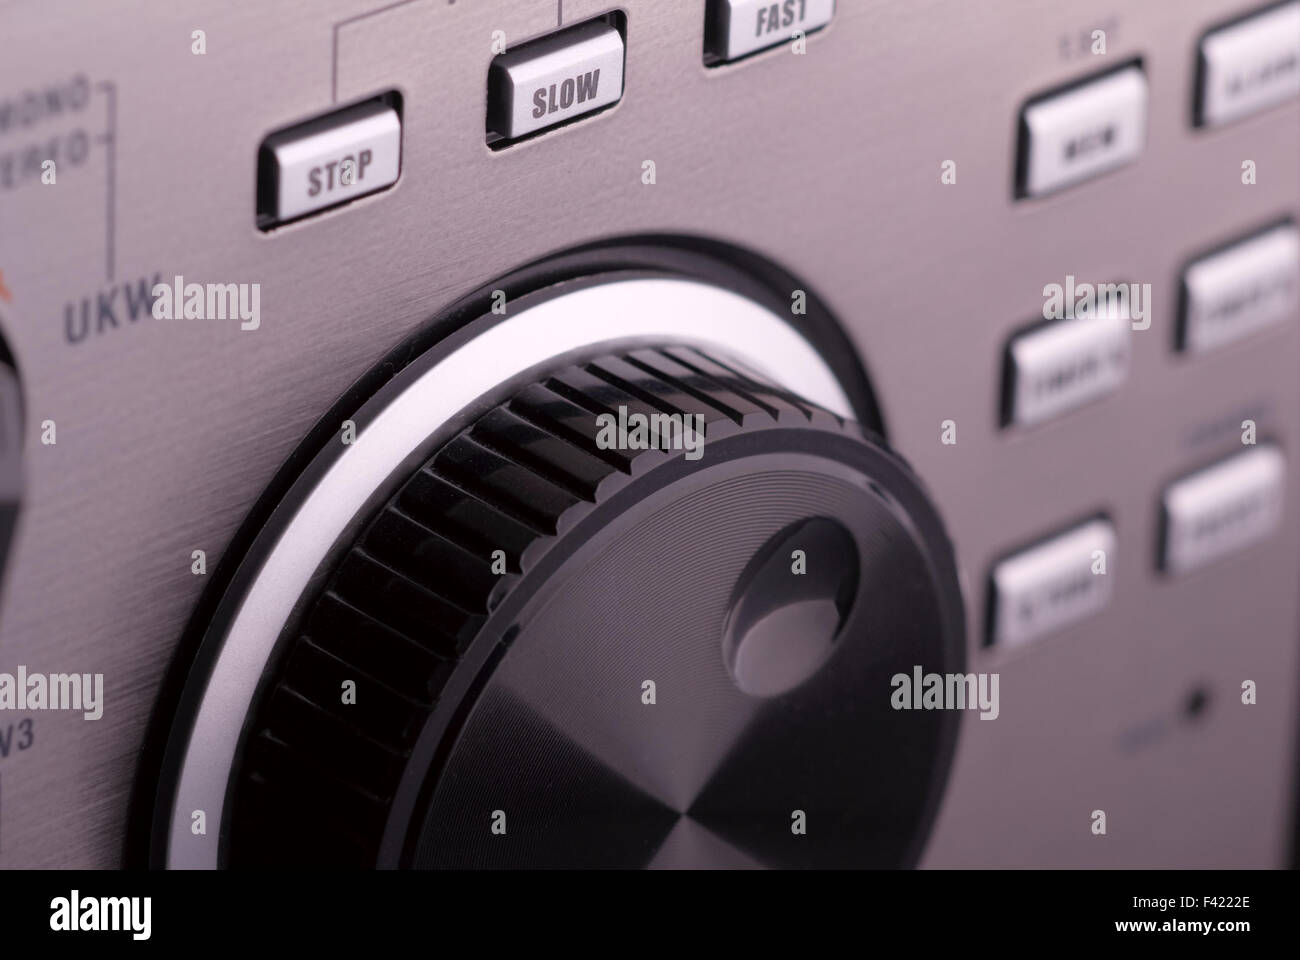 Jog dial and selection knobs, silver metallic surface Stock Photo